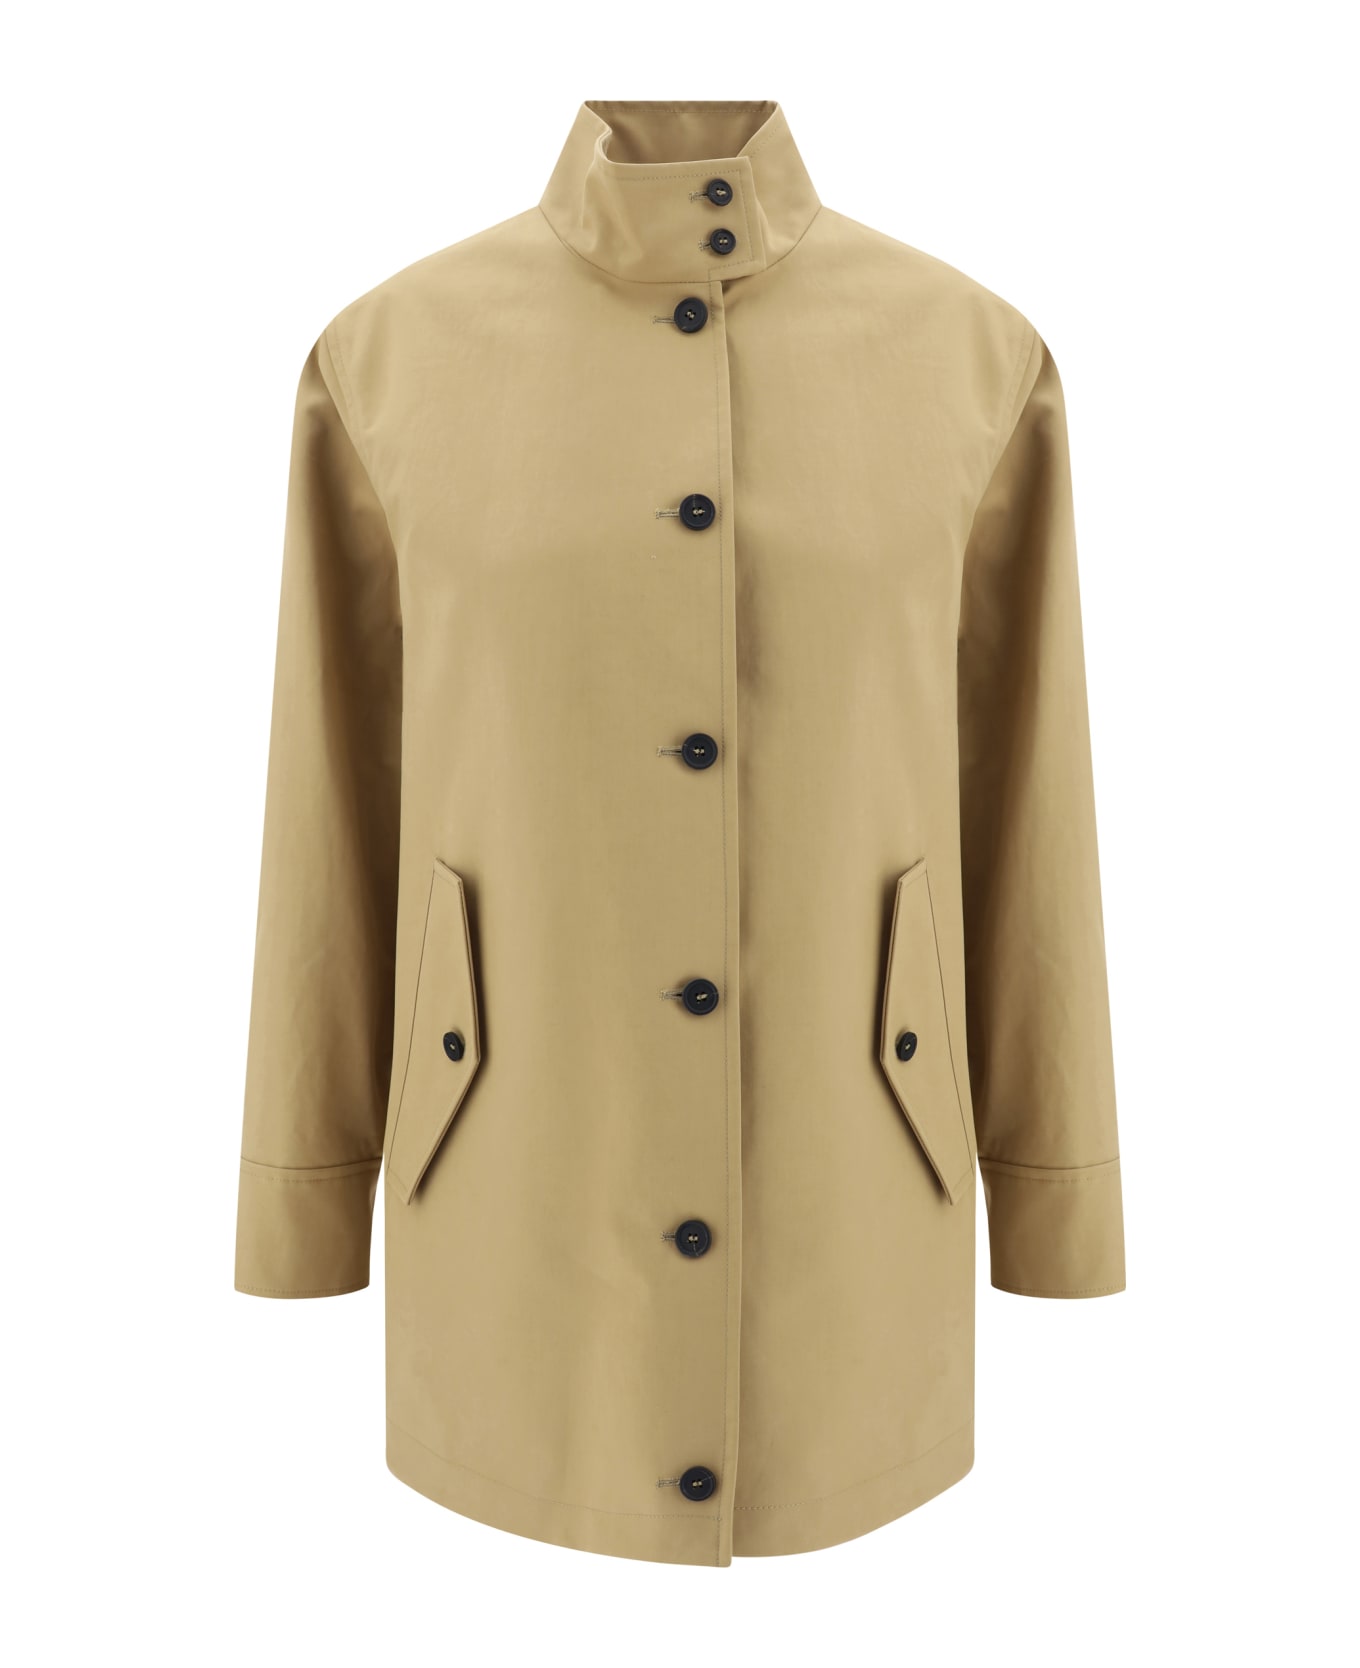 Fabiana Filippi Trench Coat - Only One Color